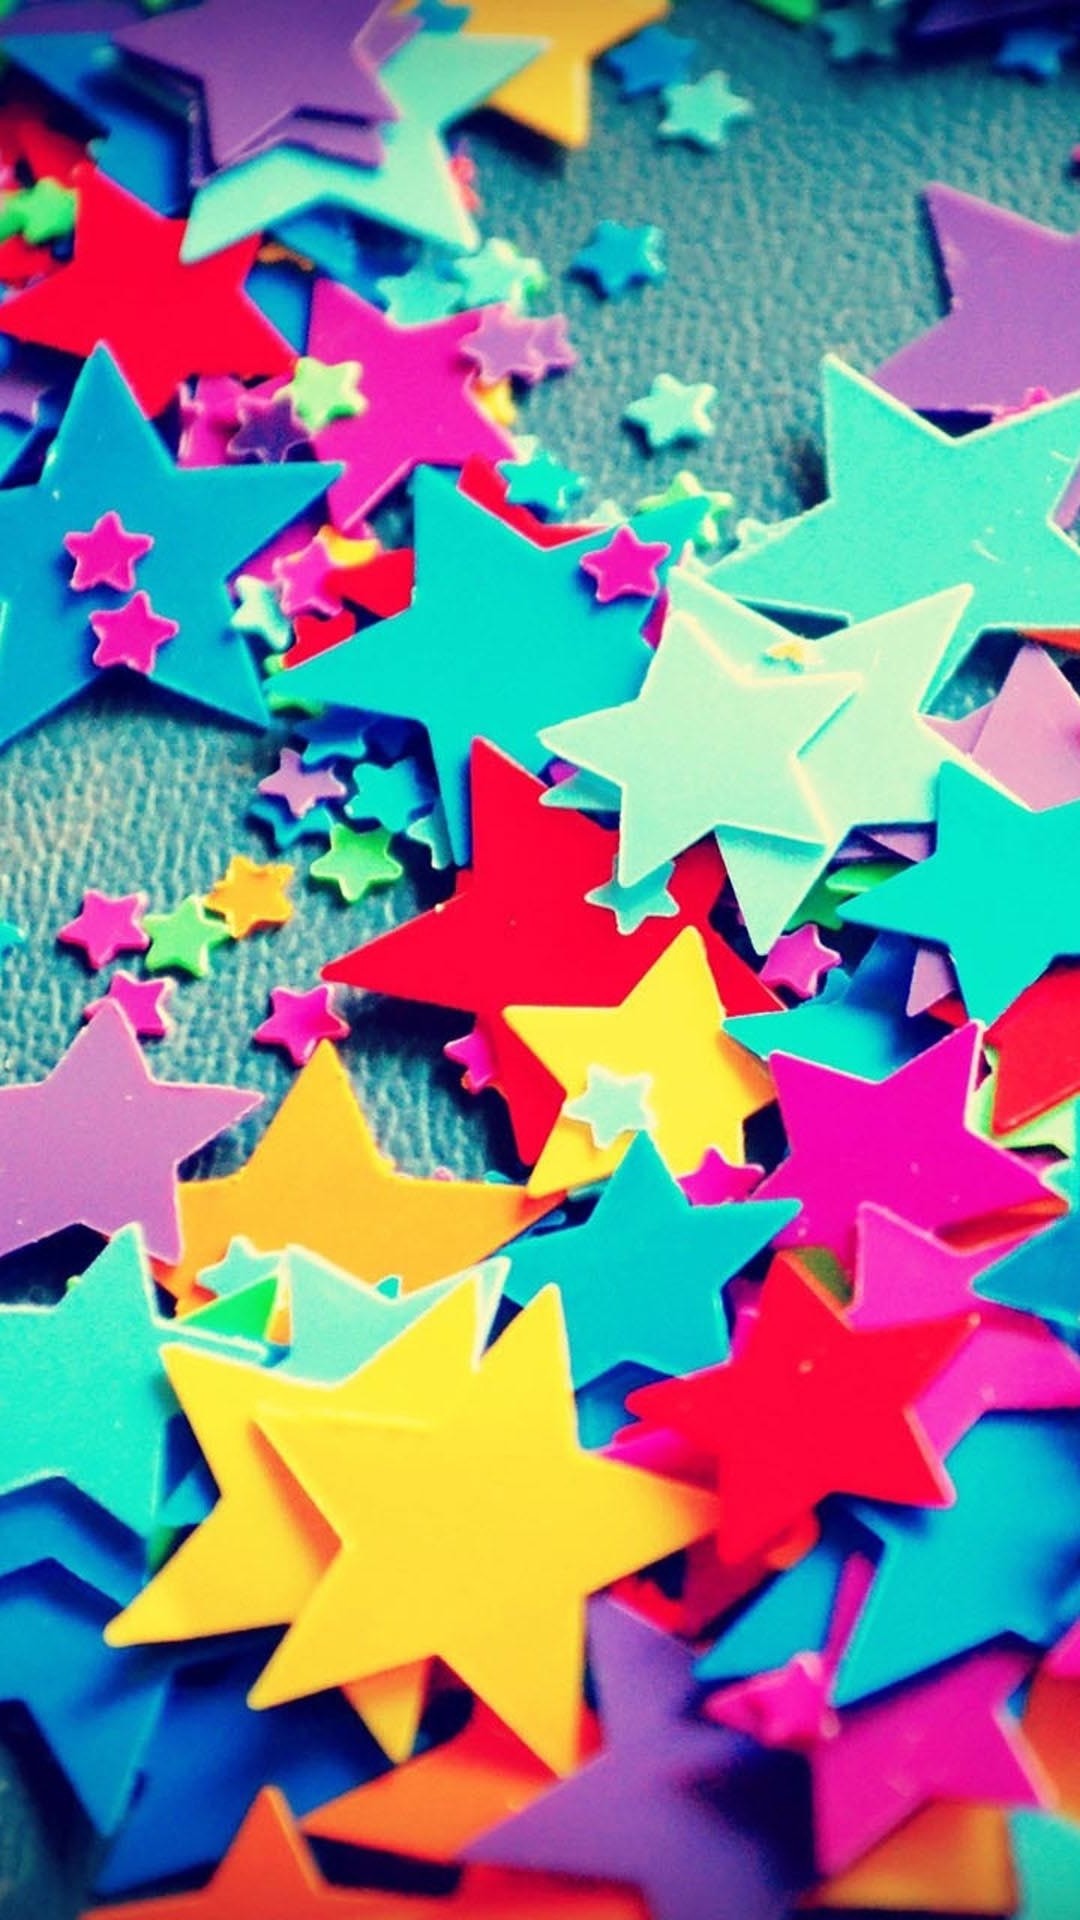 Samsung Galaxy S4 wallpapers Wallpapers Girly stars android wallpaper